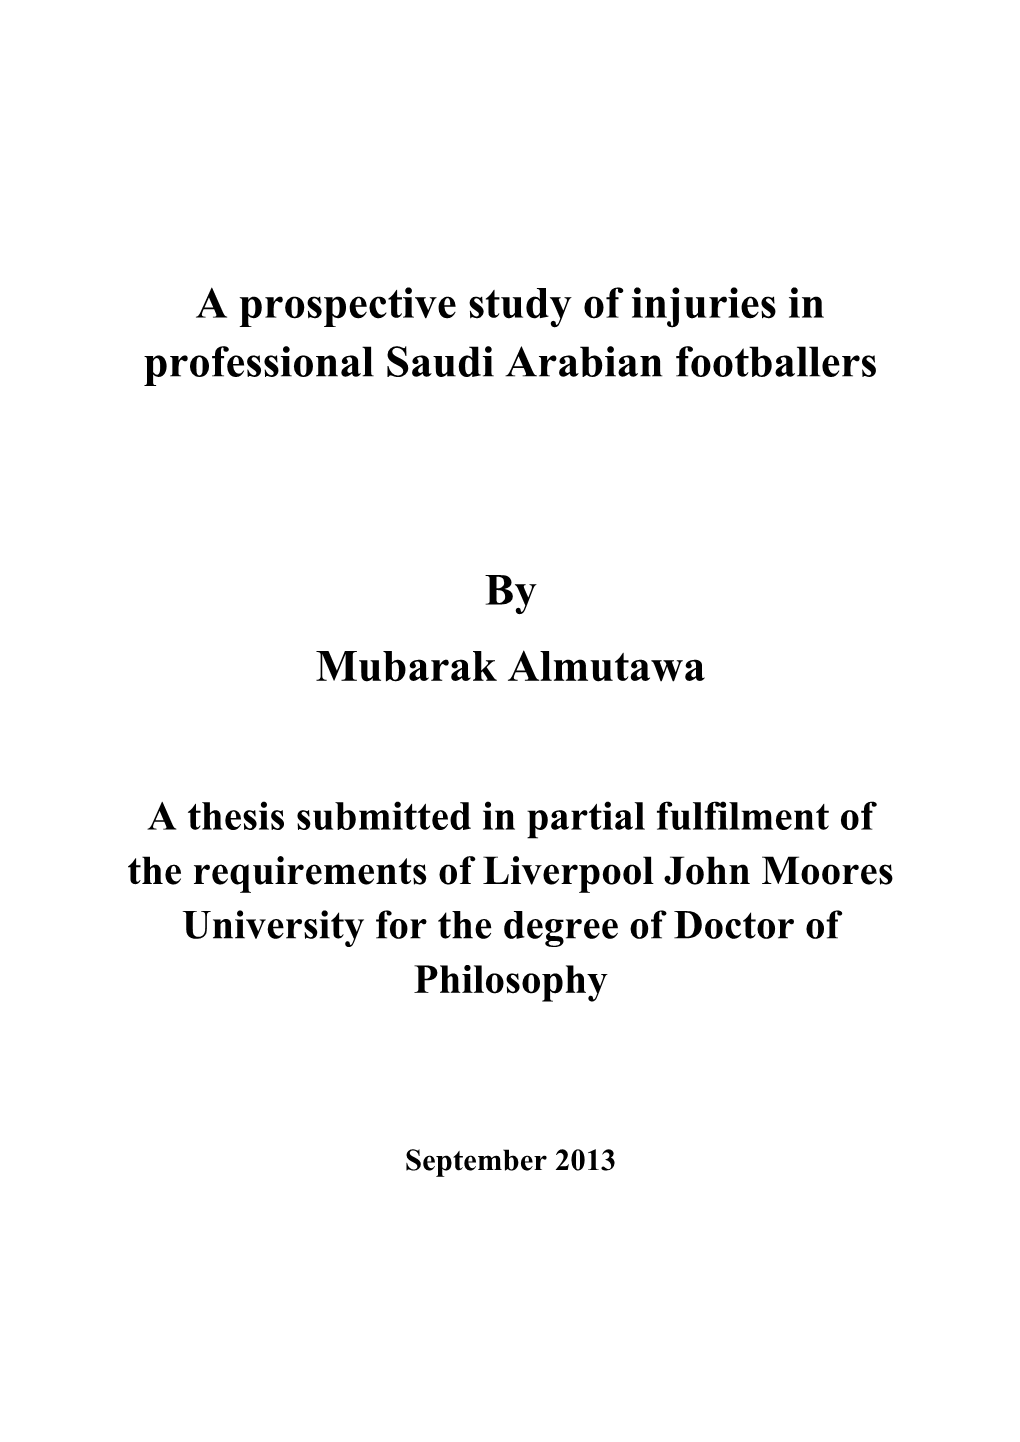 A Prospective Study of Injuries in Professional Saudi Arabian Footballers